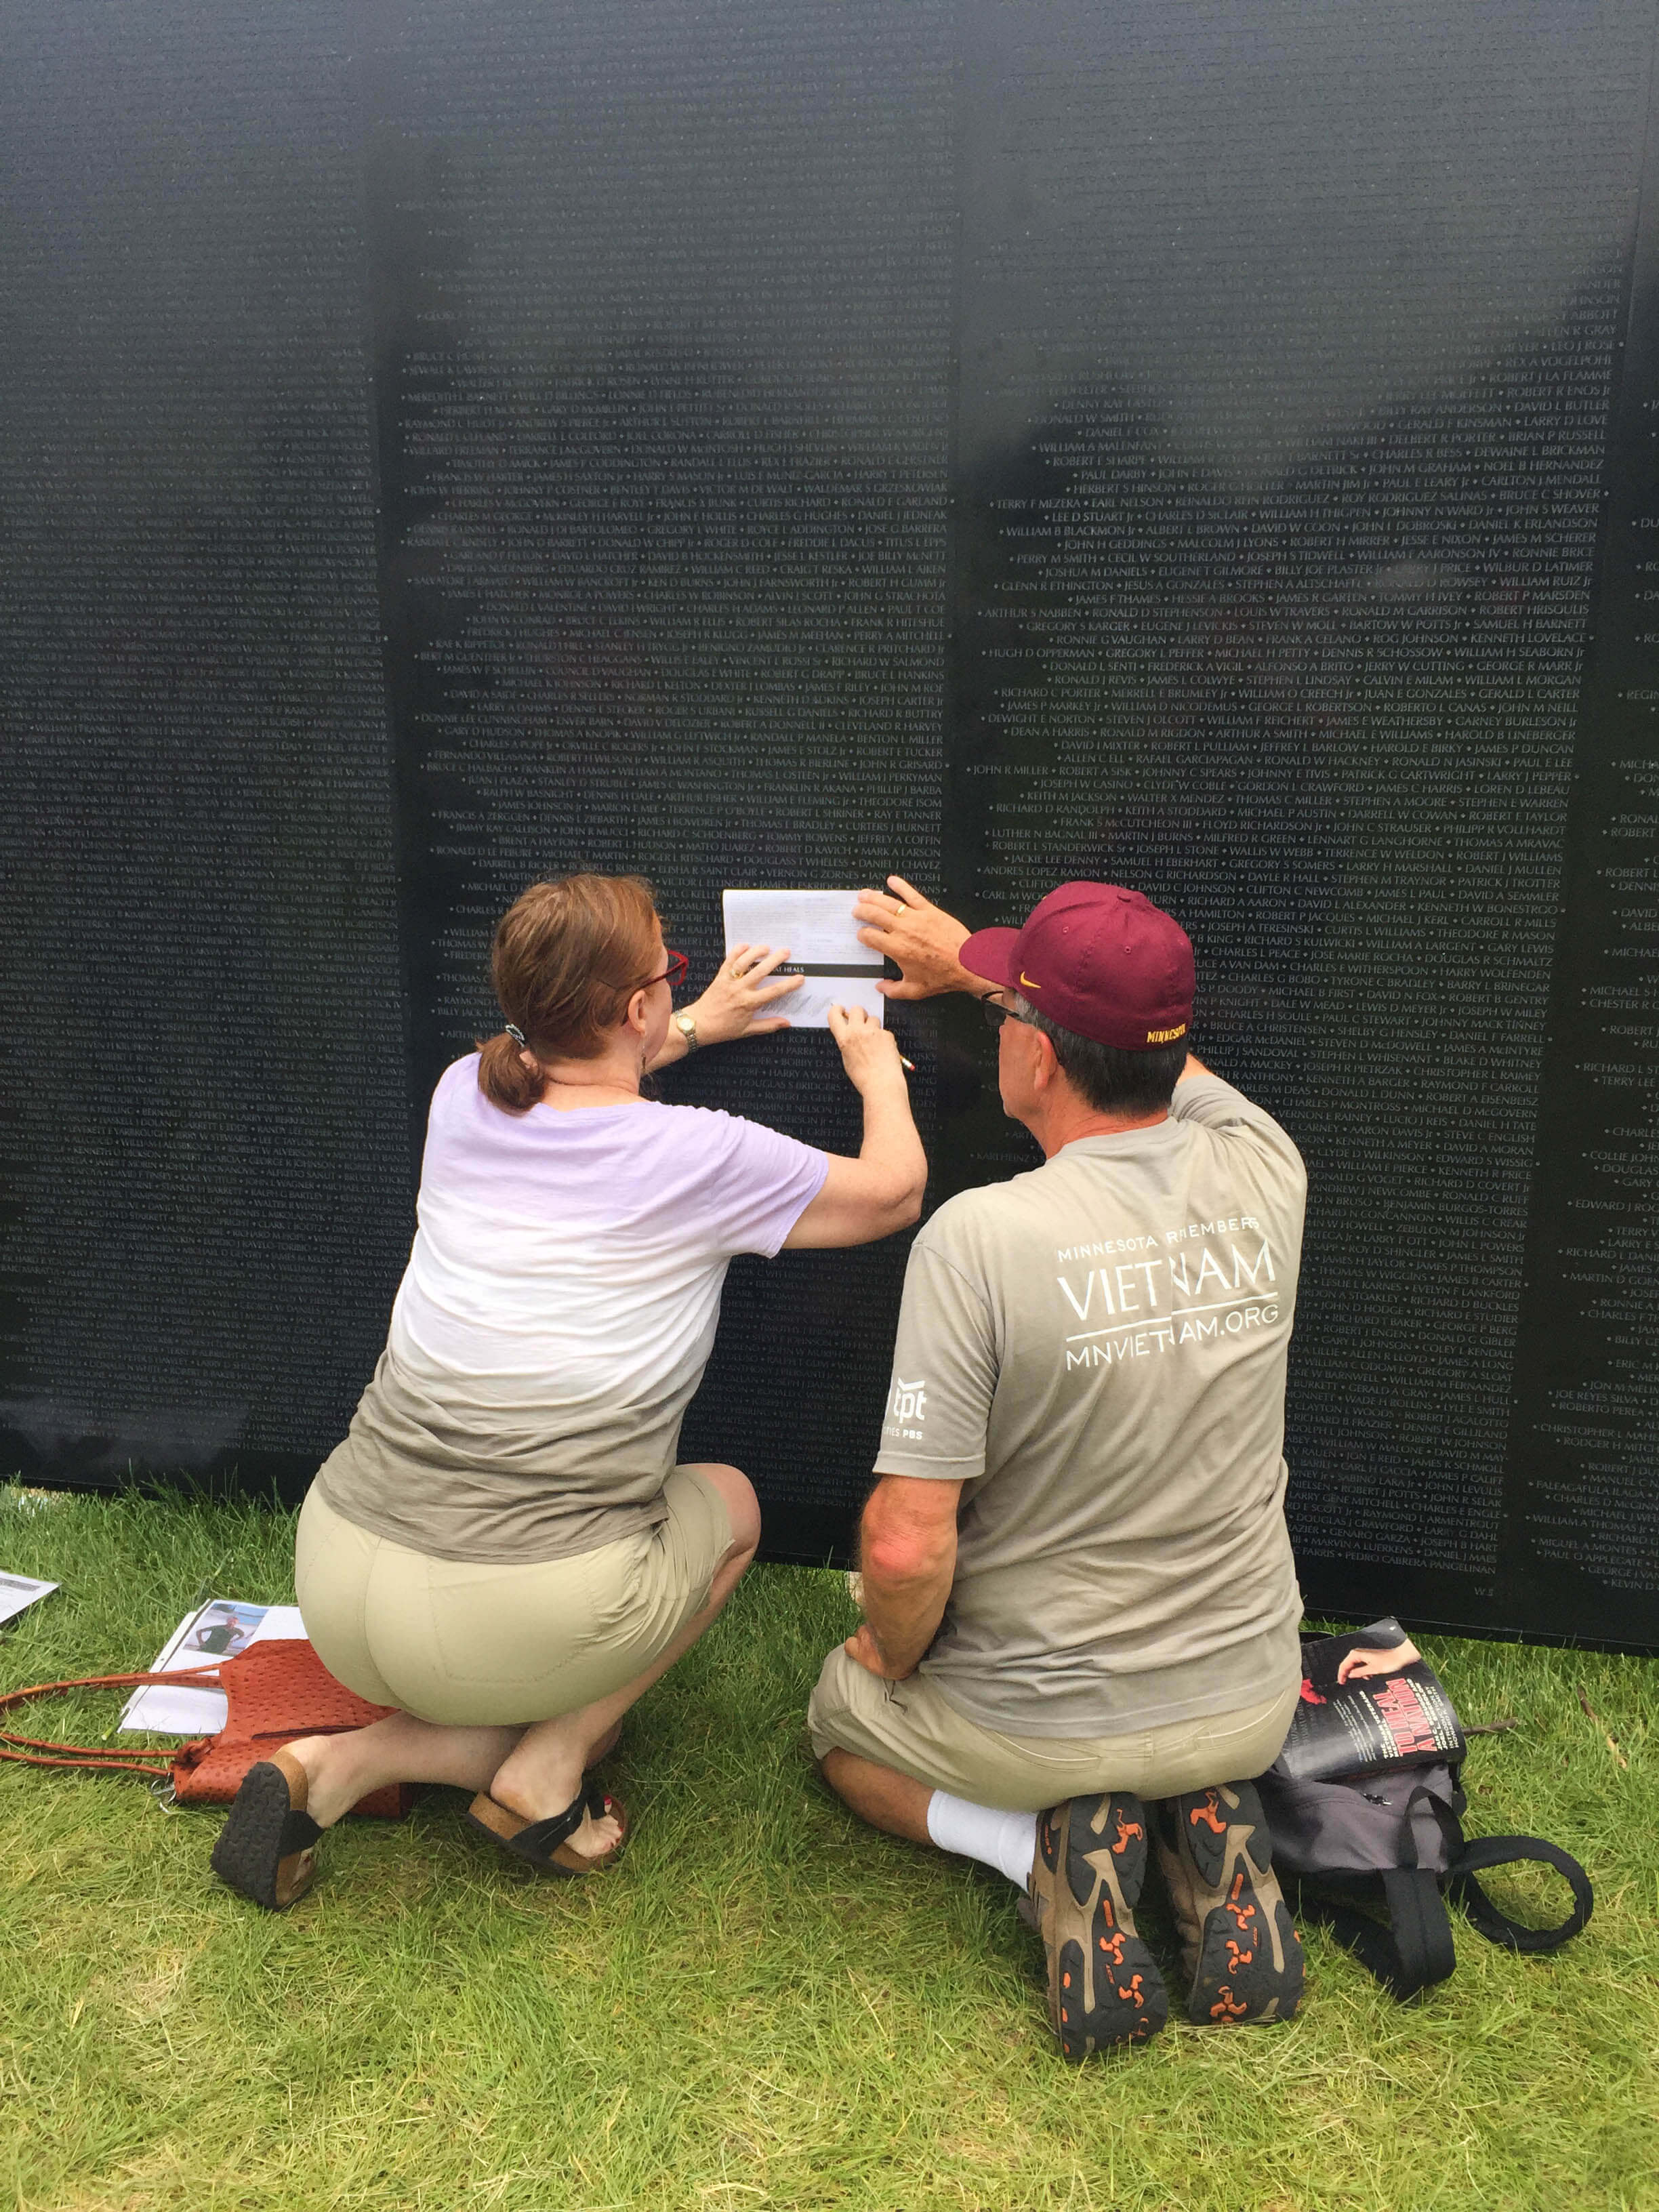 Man helping a woman do a name rubbing at a replica of the Vietnam Wall.